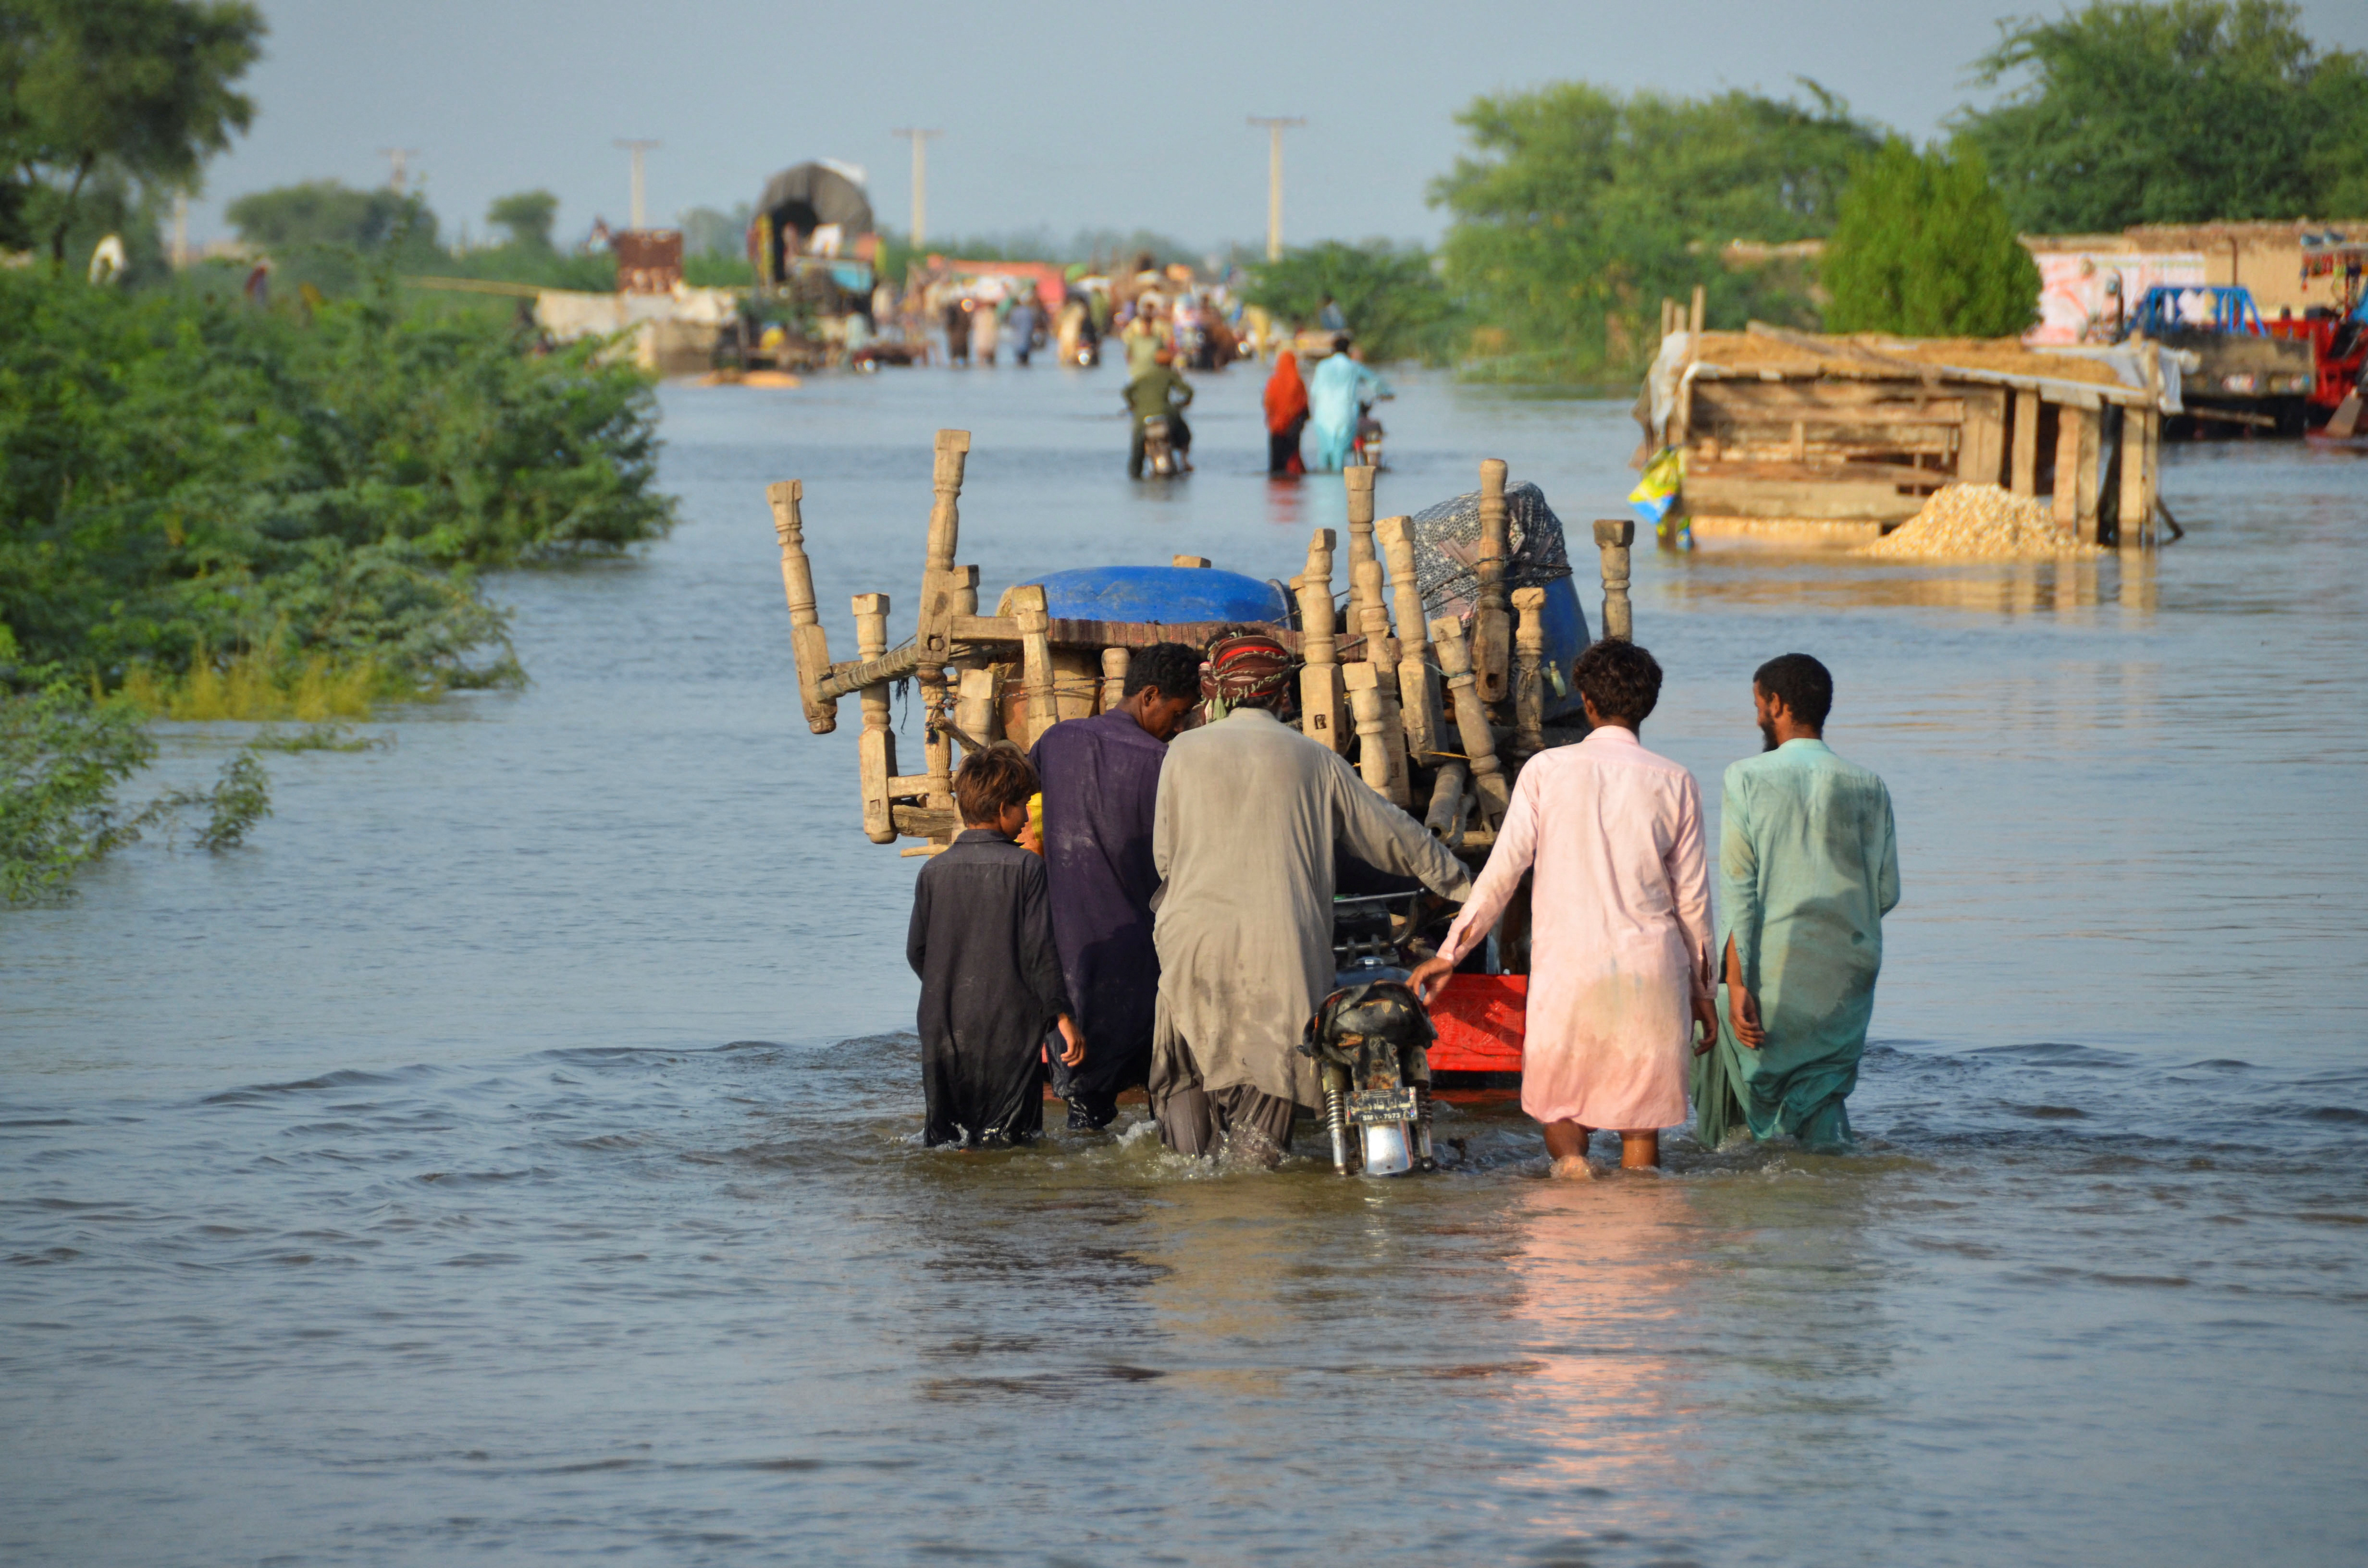 Men walk along a flooded road with their belongings, following rains and floods during the monsoon season in Sohbatpur